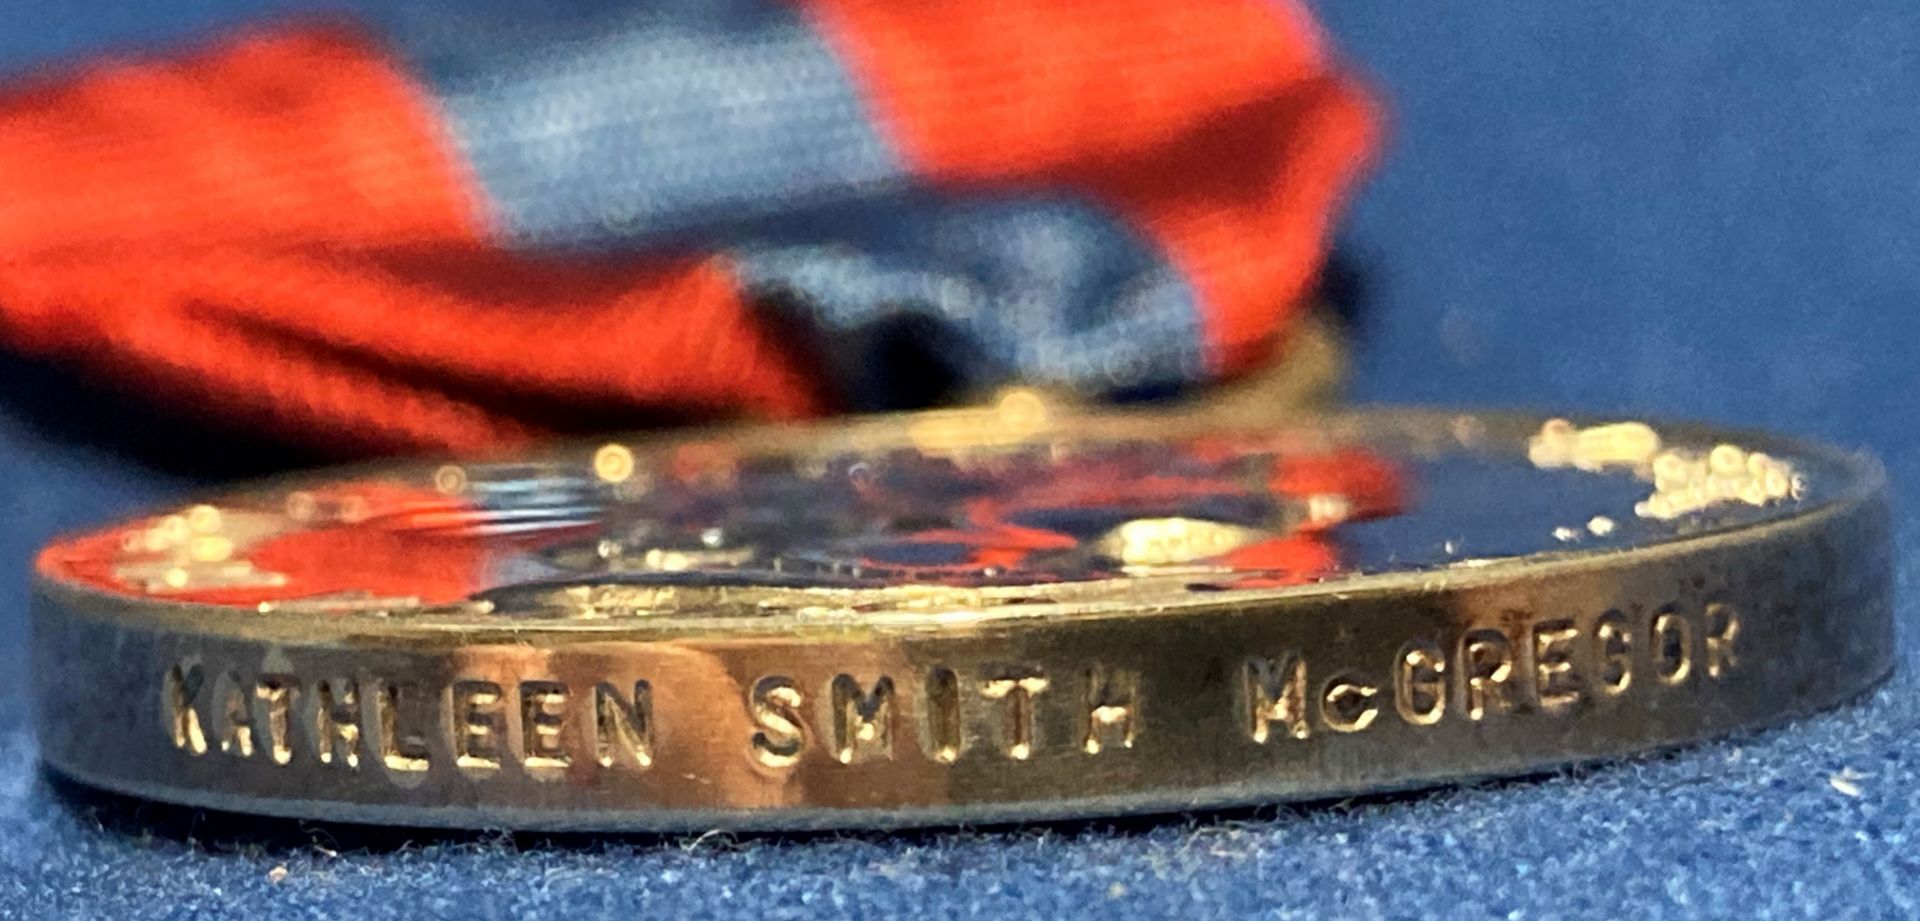 An Imperial Service Medal with ribbon engraved to side Kathleen Smith McGregor, - Image 3 of 4